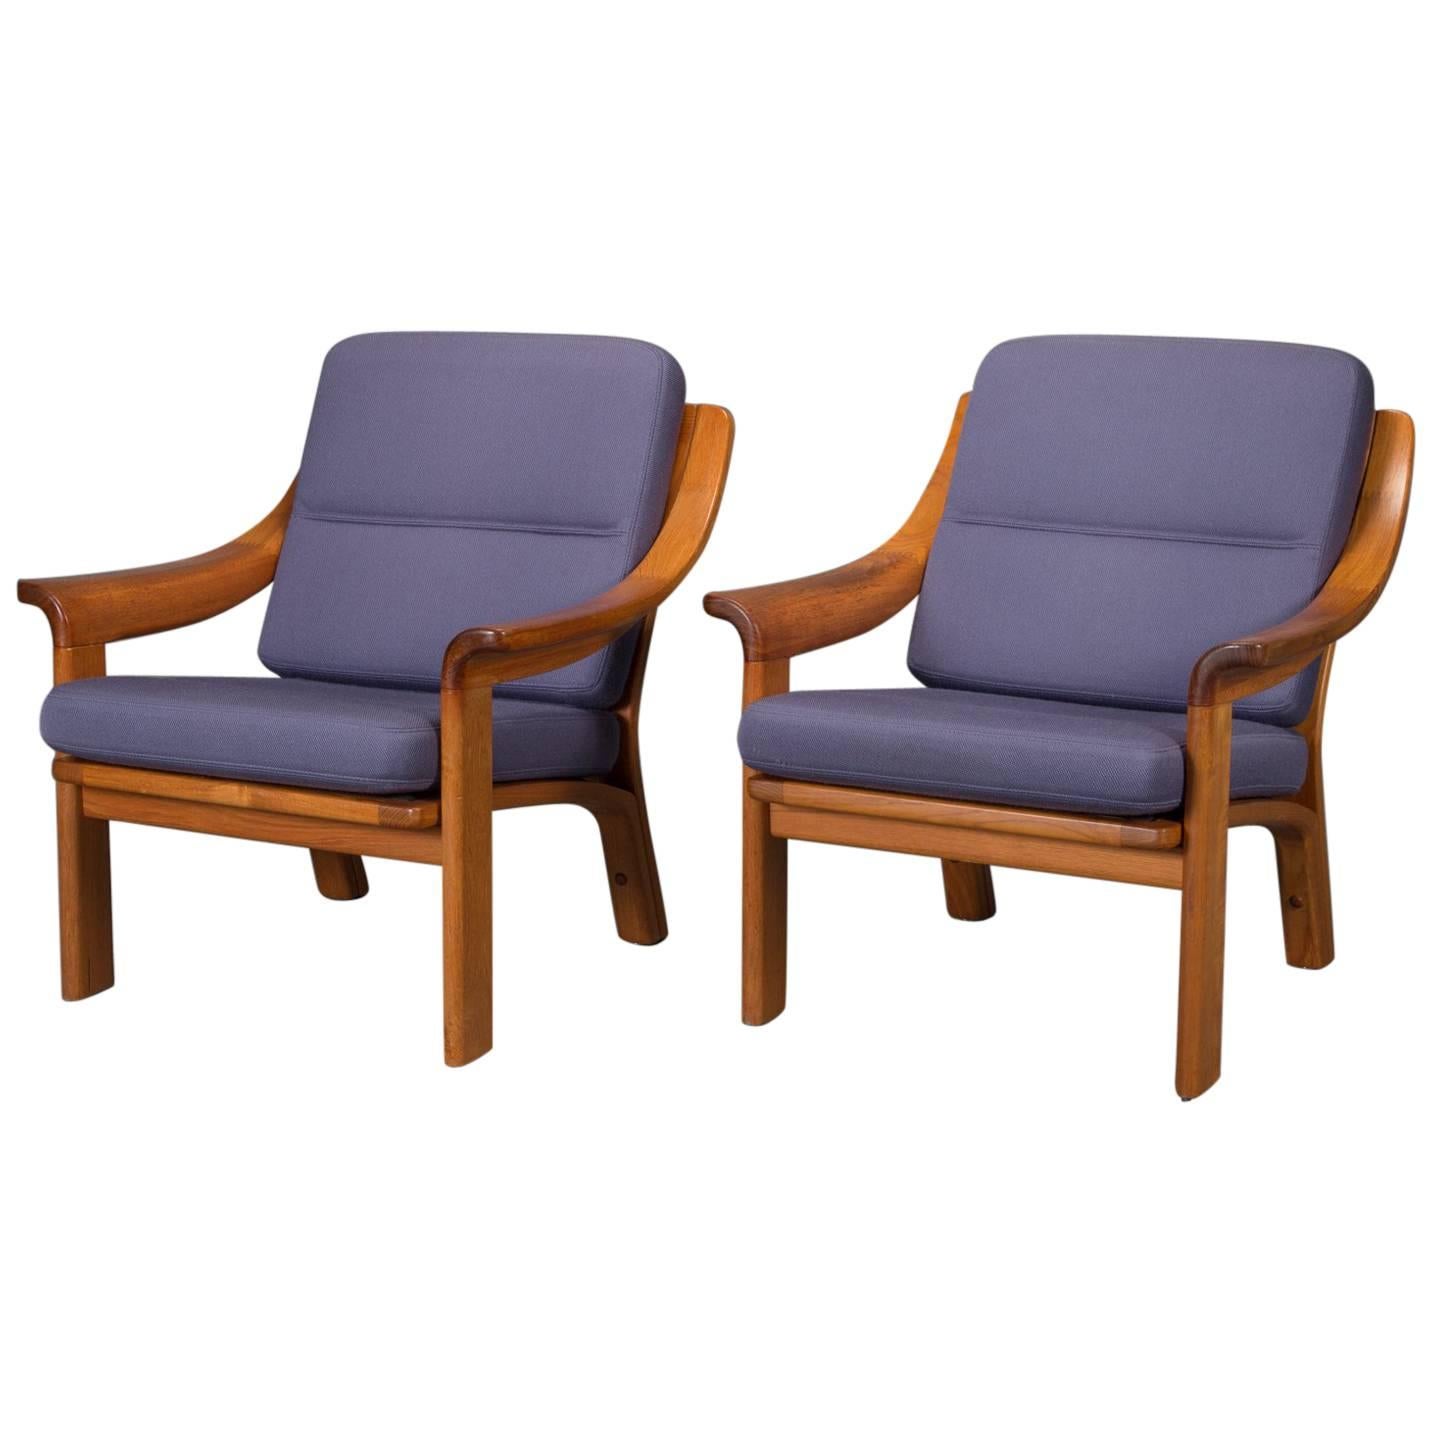 Pair of Armchairs with Finger Joint Arms by PJ Danmark